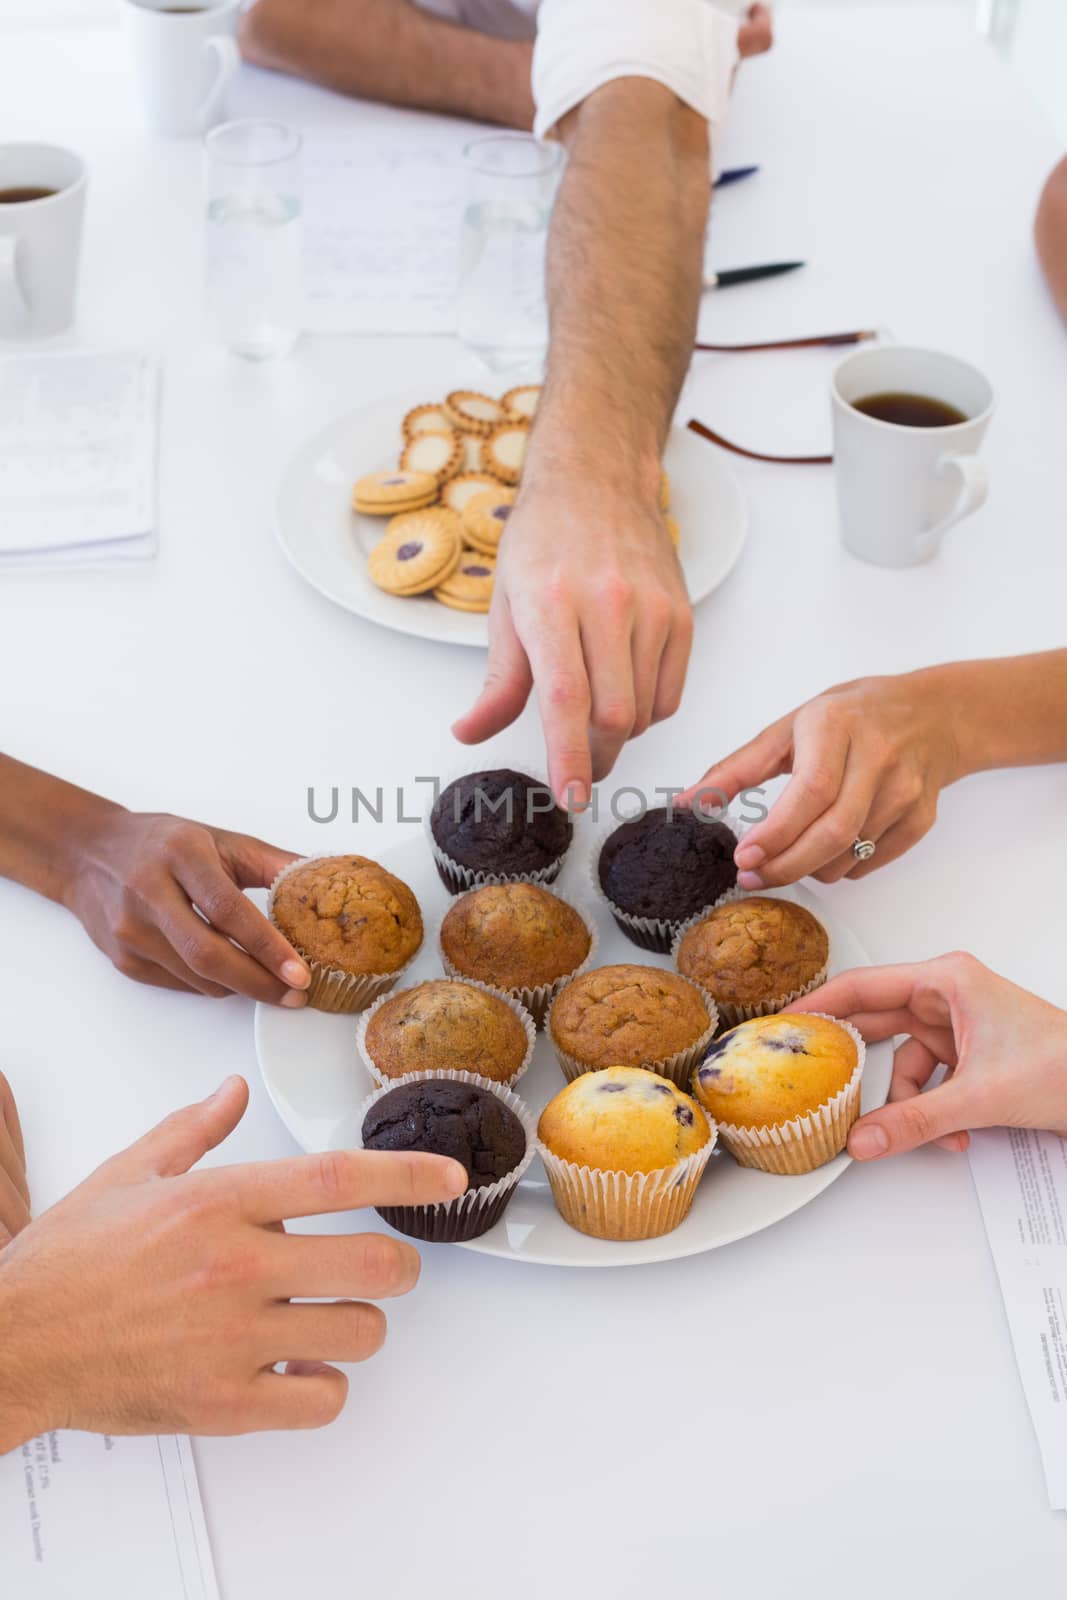 Business people taking muffins from plate by Wavebreakmedia